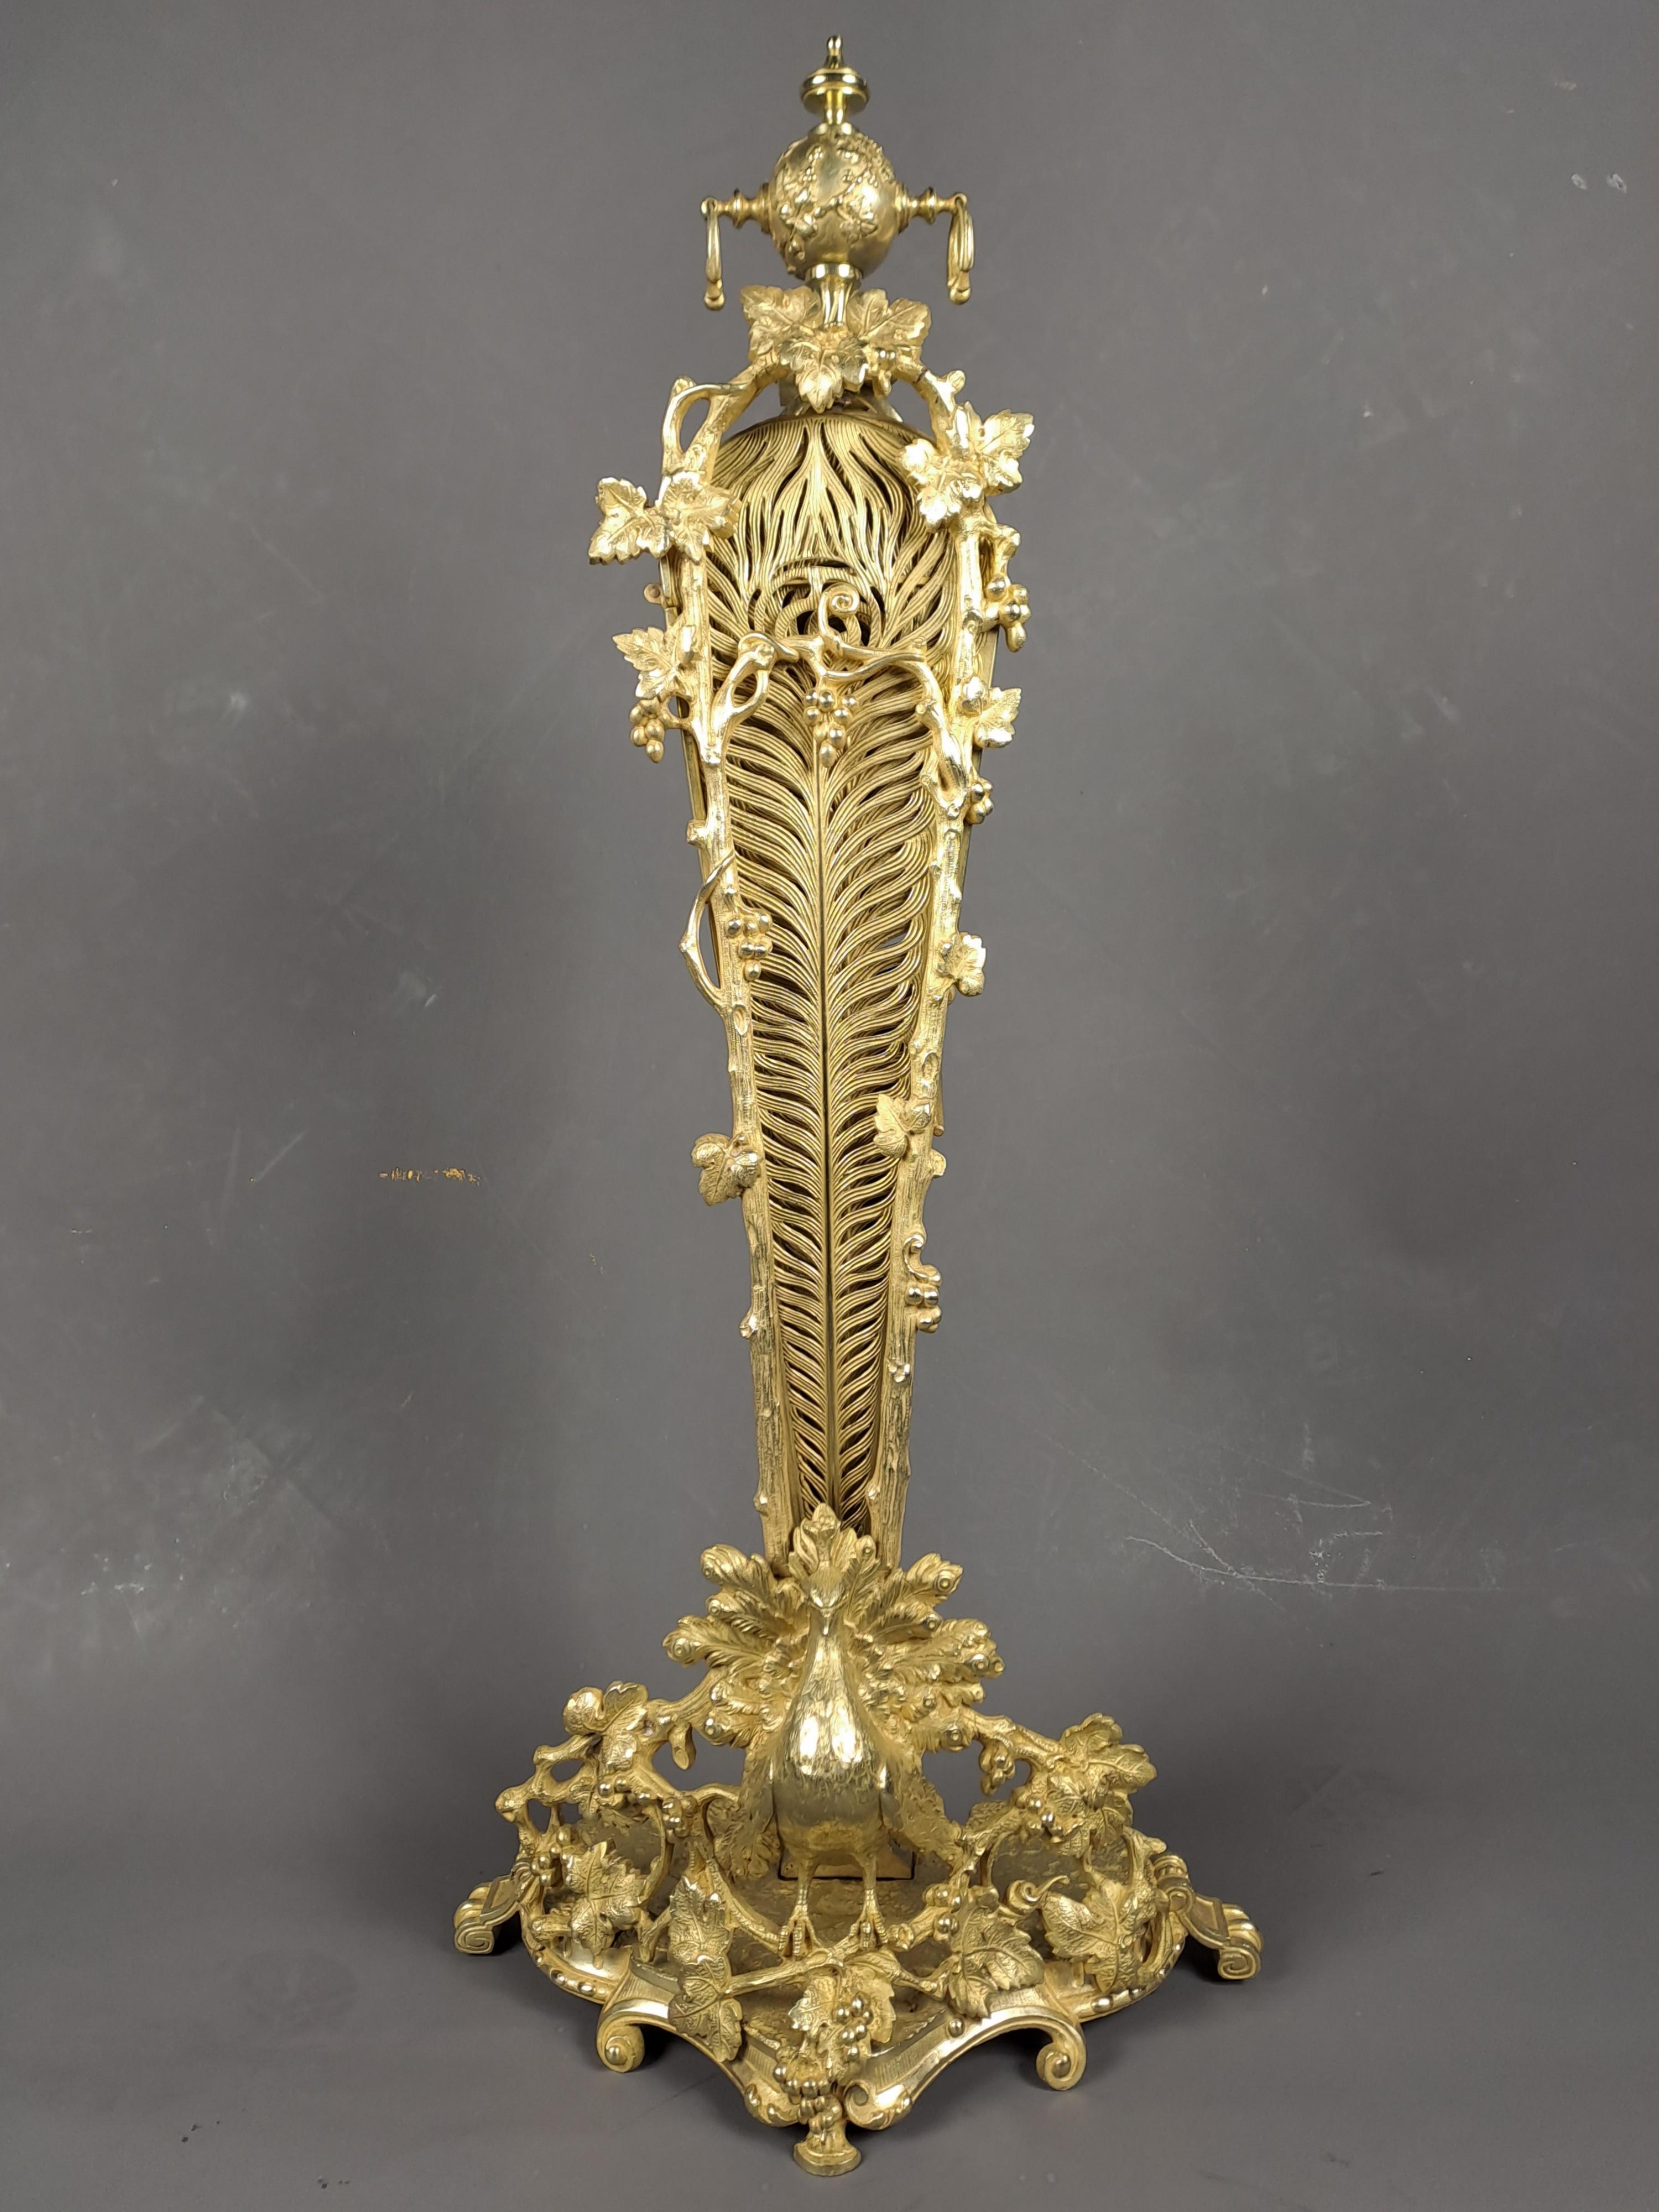 Magnificent and rare gilt bronze fire screen from the art nouveau period depicting a peacock in a decoration of vine branches.
15 blades in the shape of peacock feathers.
Superb work around 1890
Very good condition